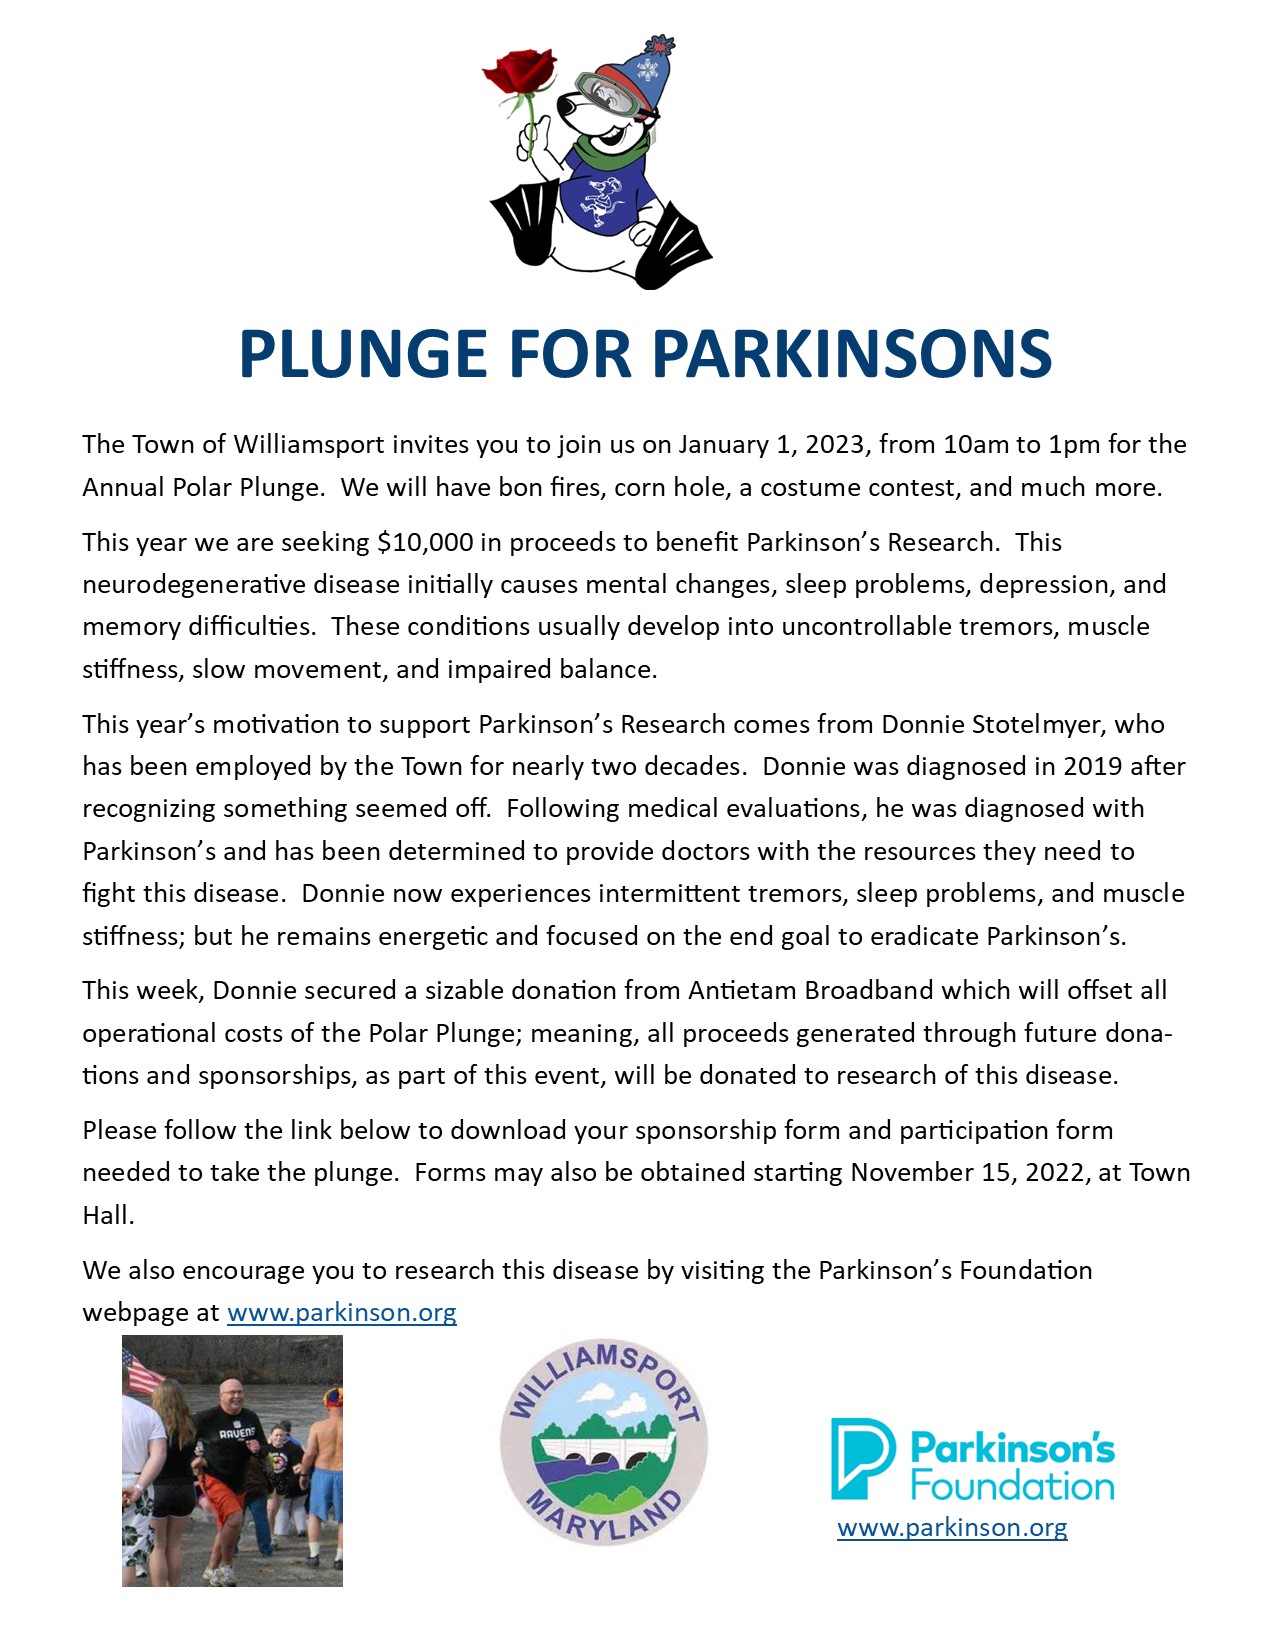 Plunge-for-Parkinsons - Town of Williamsport